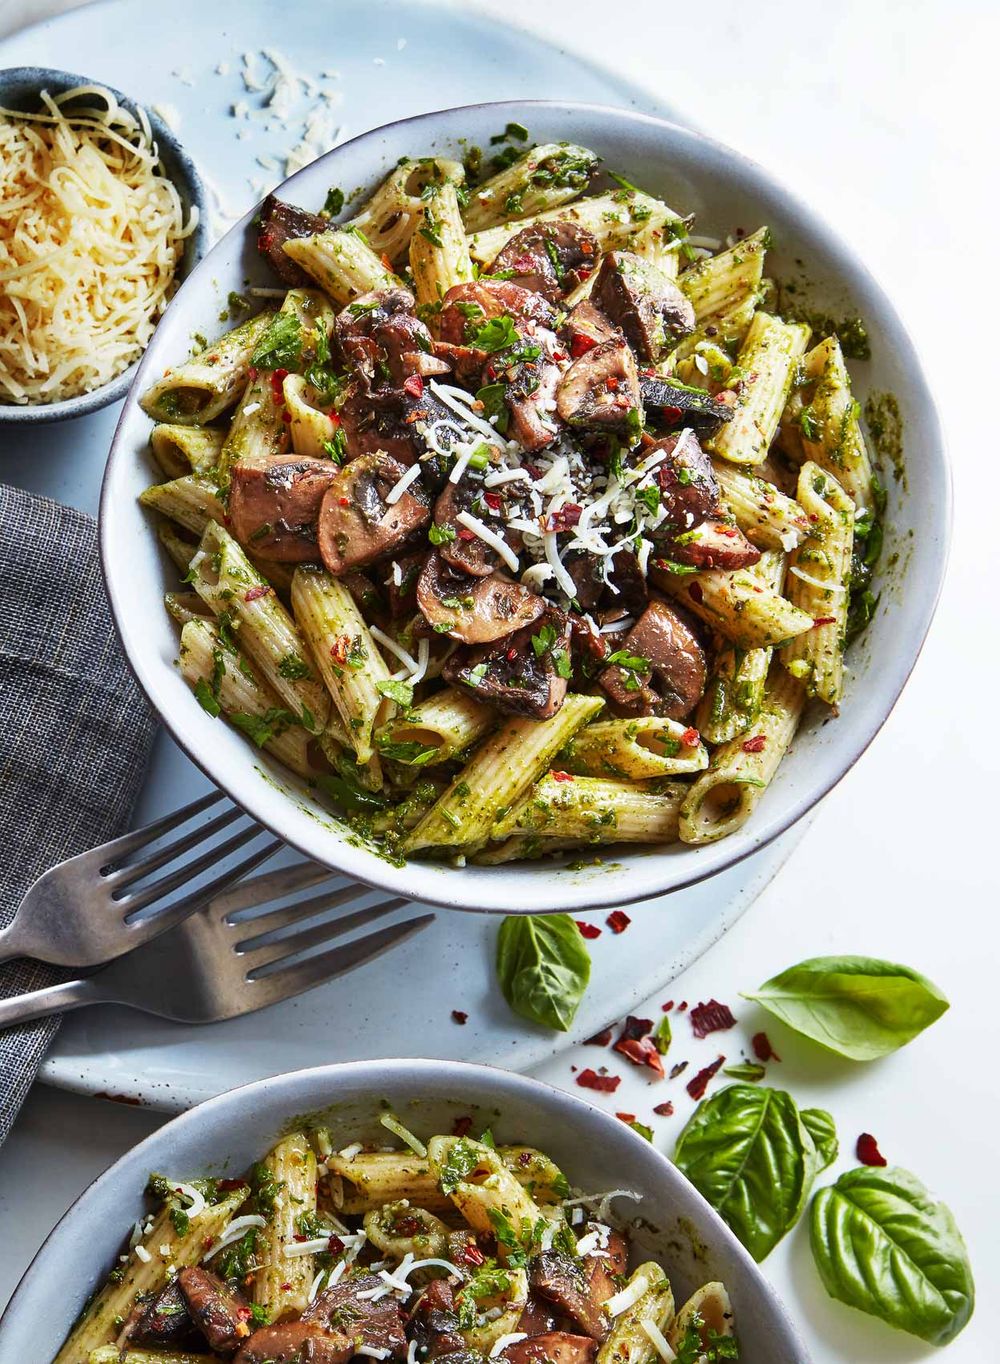 Penne pasta with pesto and mushrooms